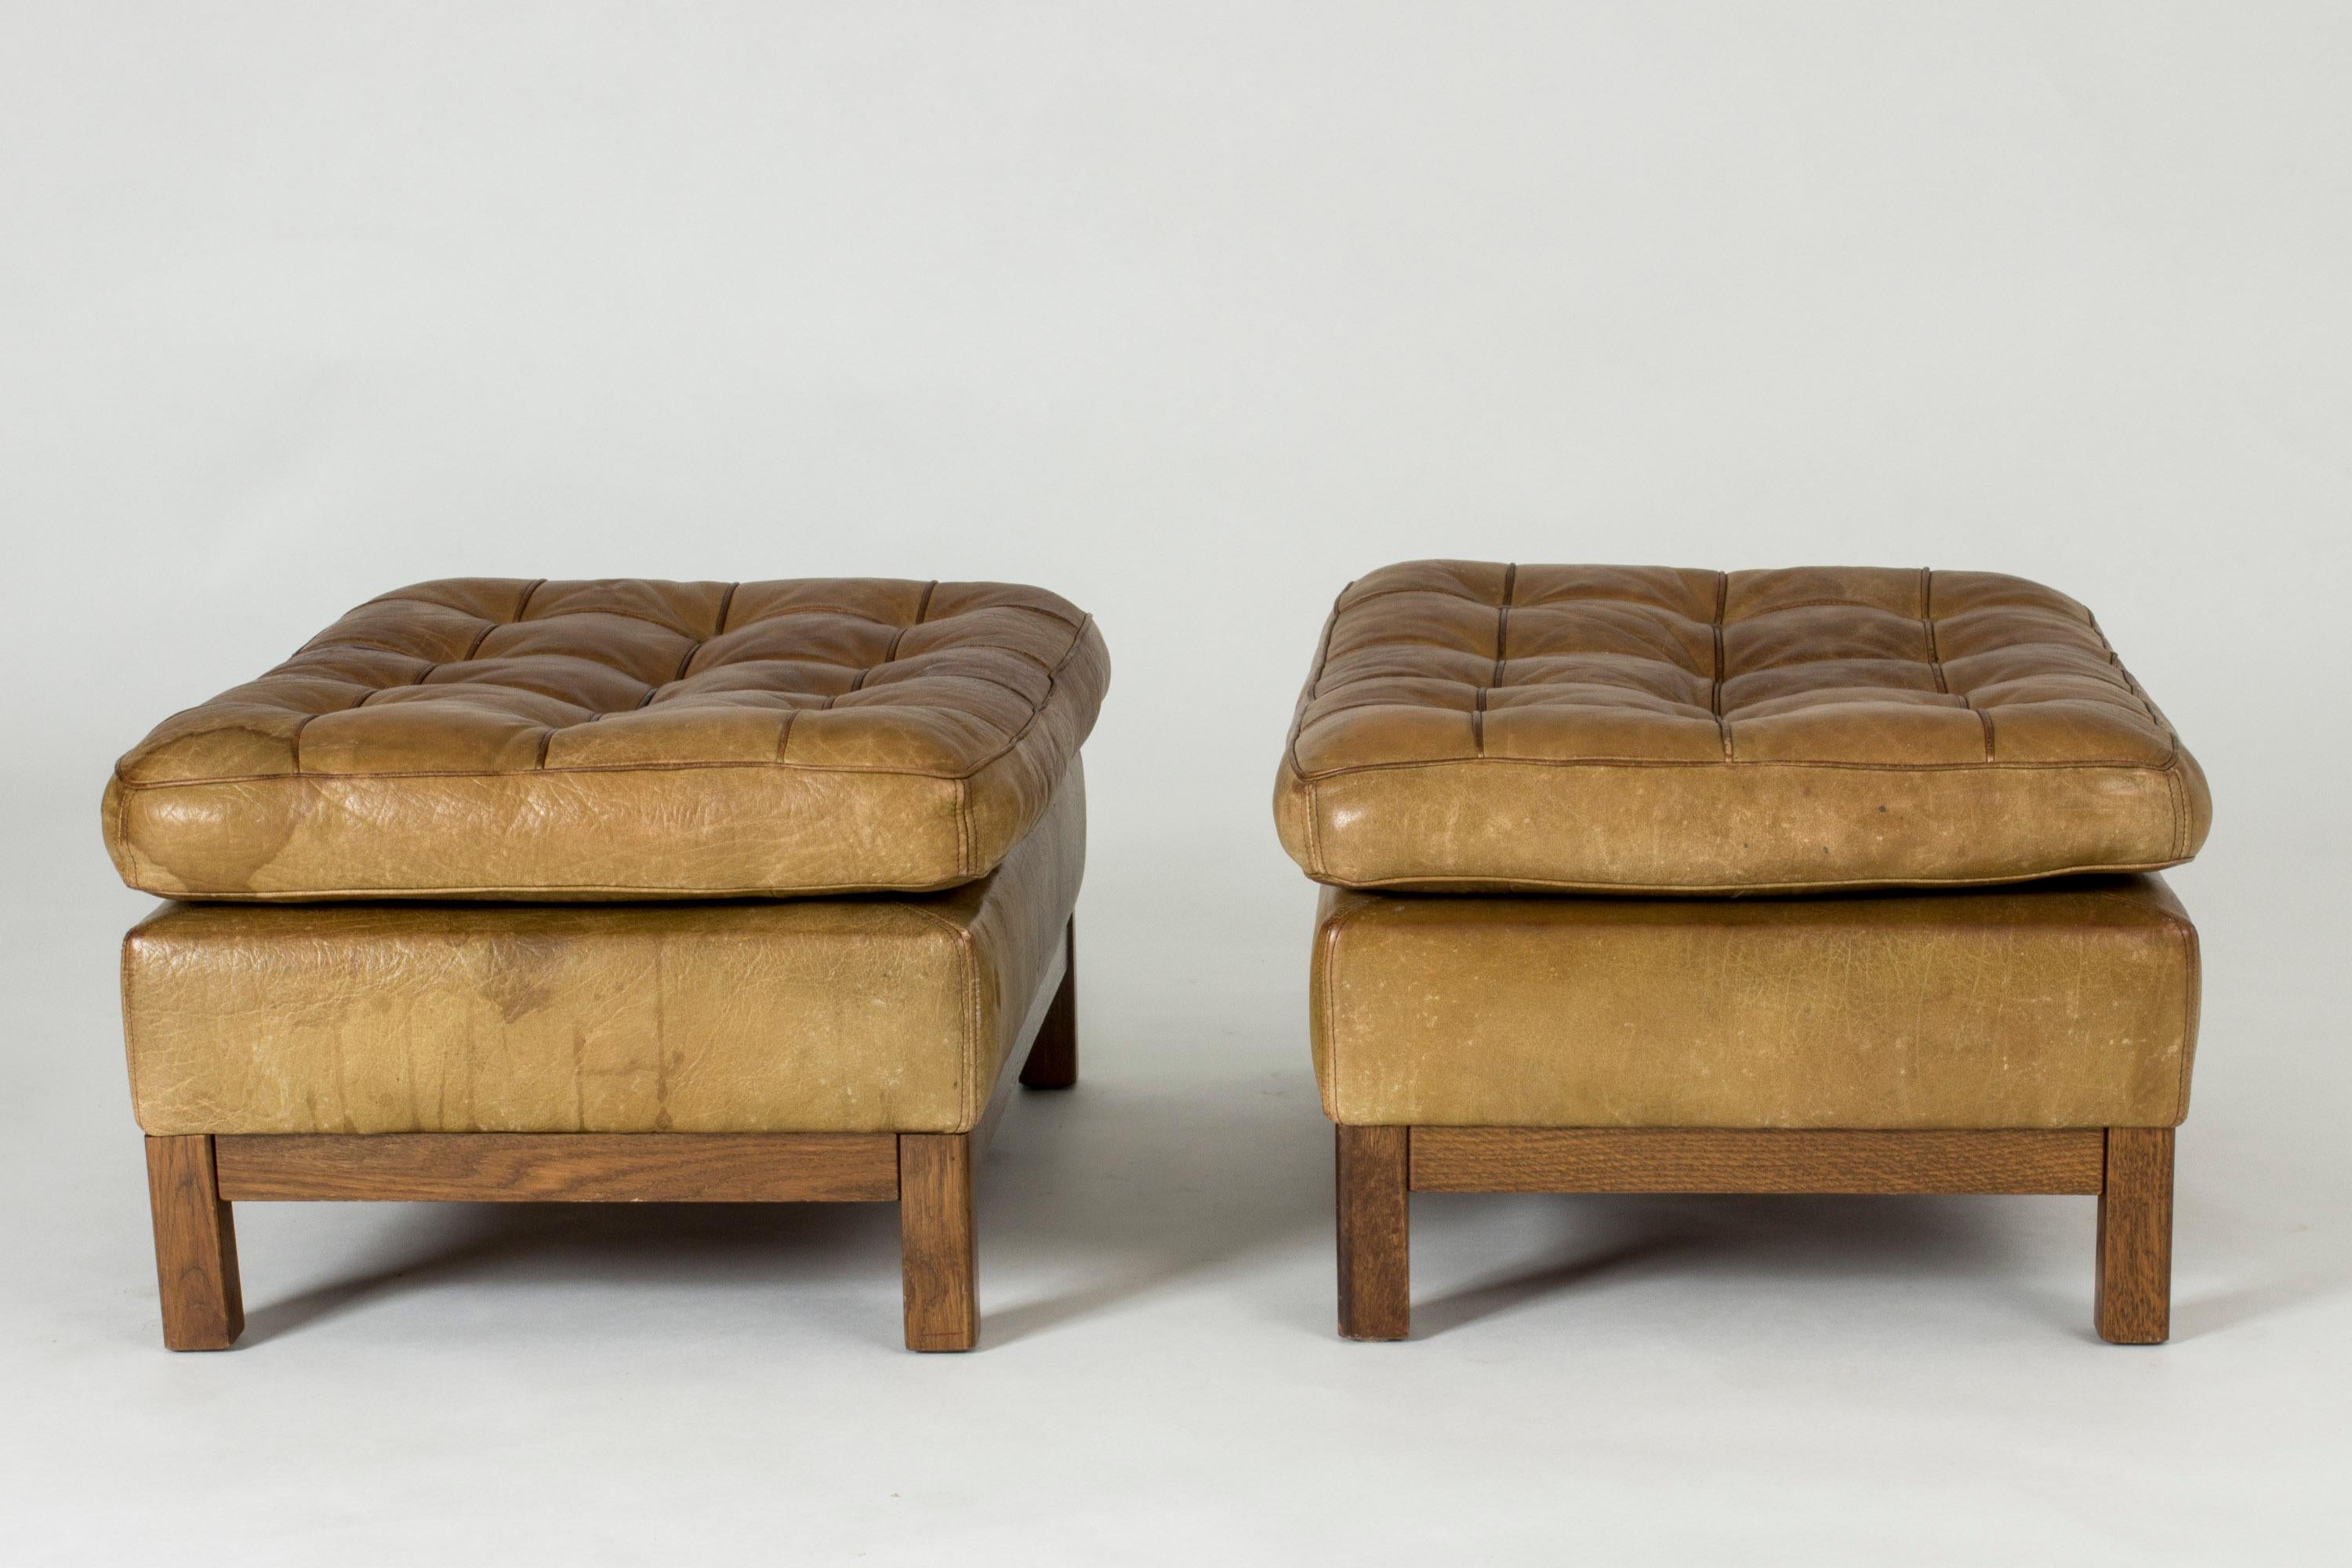 Scandinavian Modern Pair of Leather Ottomans by Arne Norell